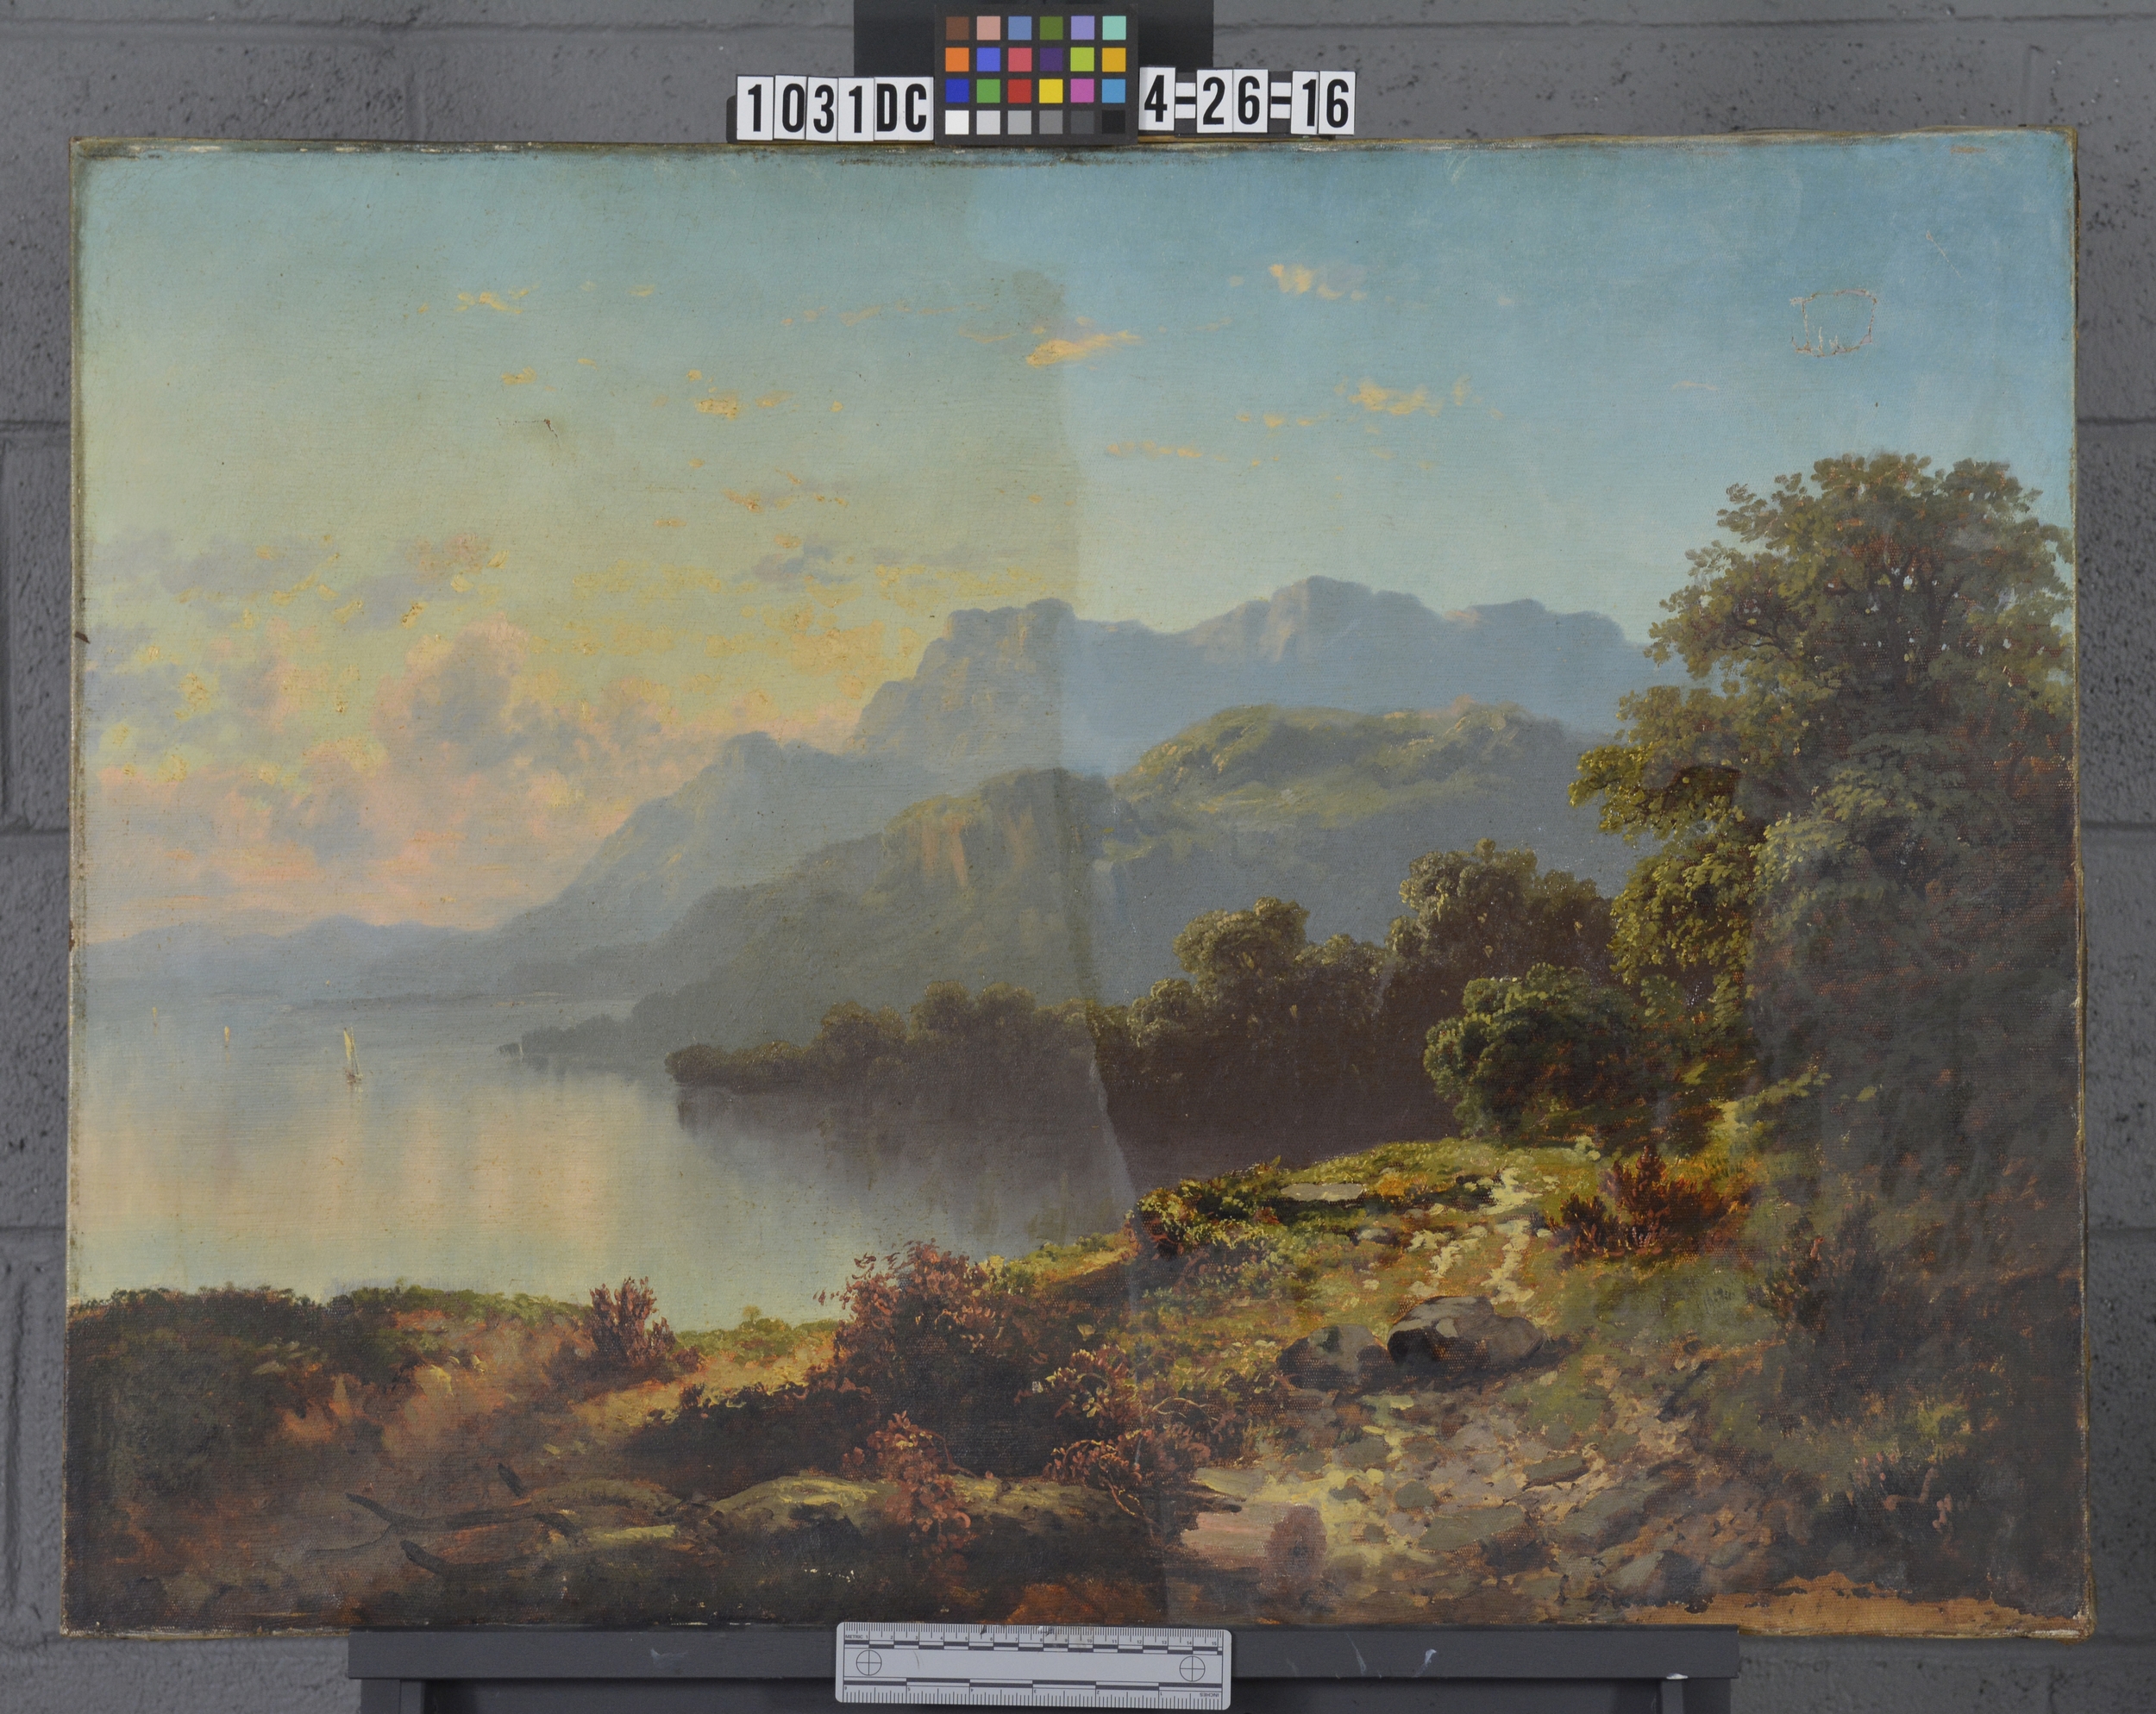  During cleaning photograph of a Hudson River Landscape.&nbsp; Dirt and Varnish are removed to reveal original colors, contrast, and atmosphere. 